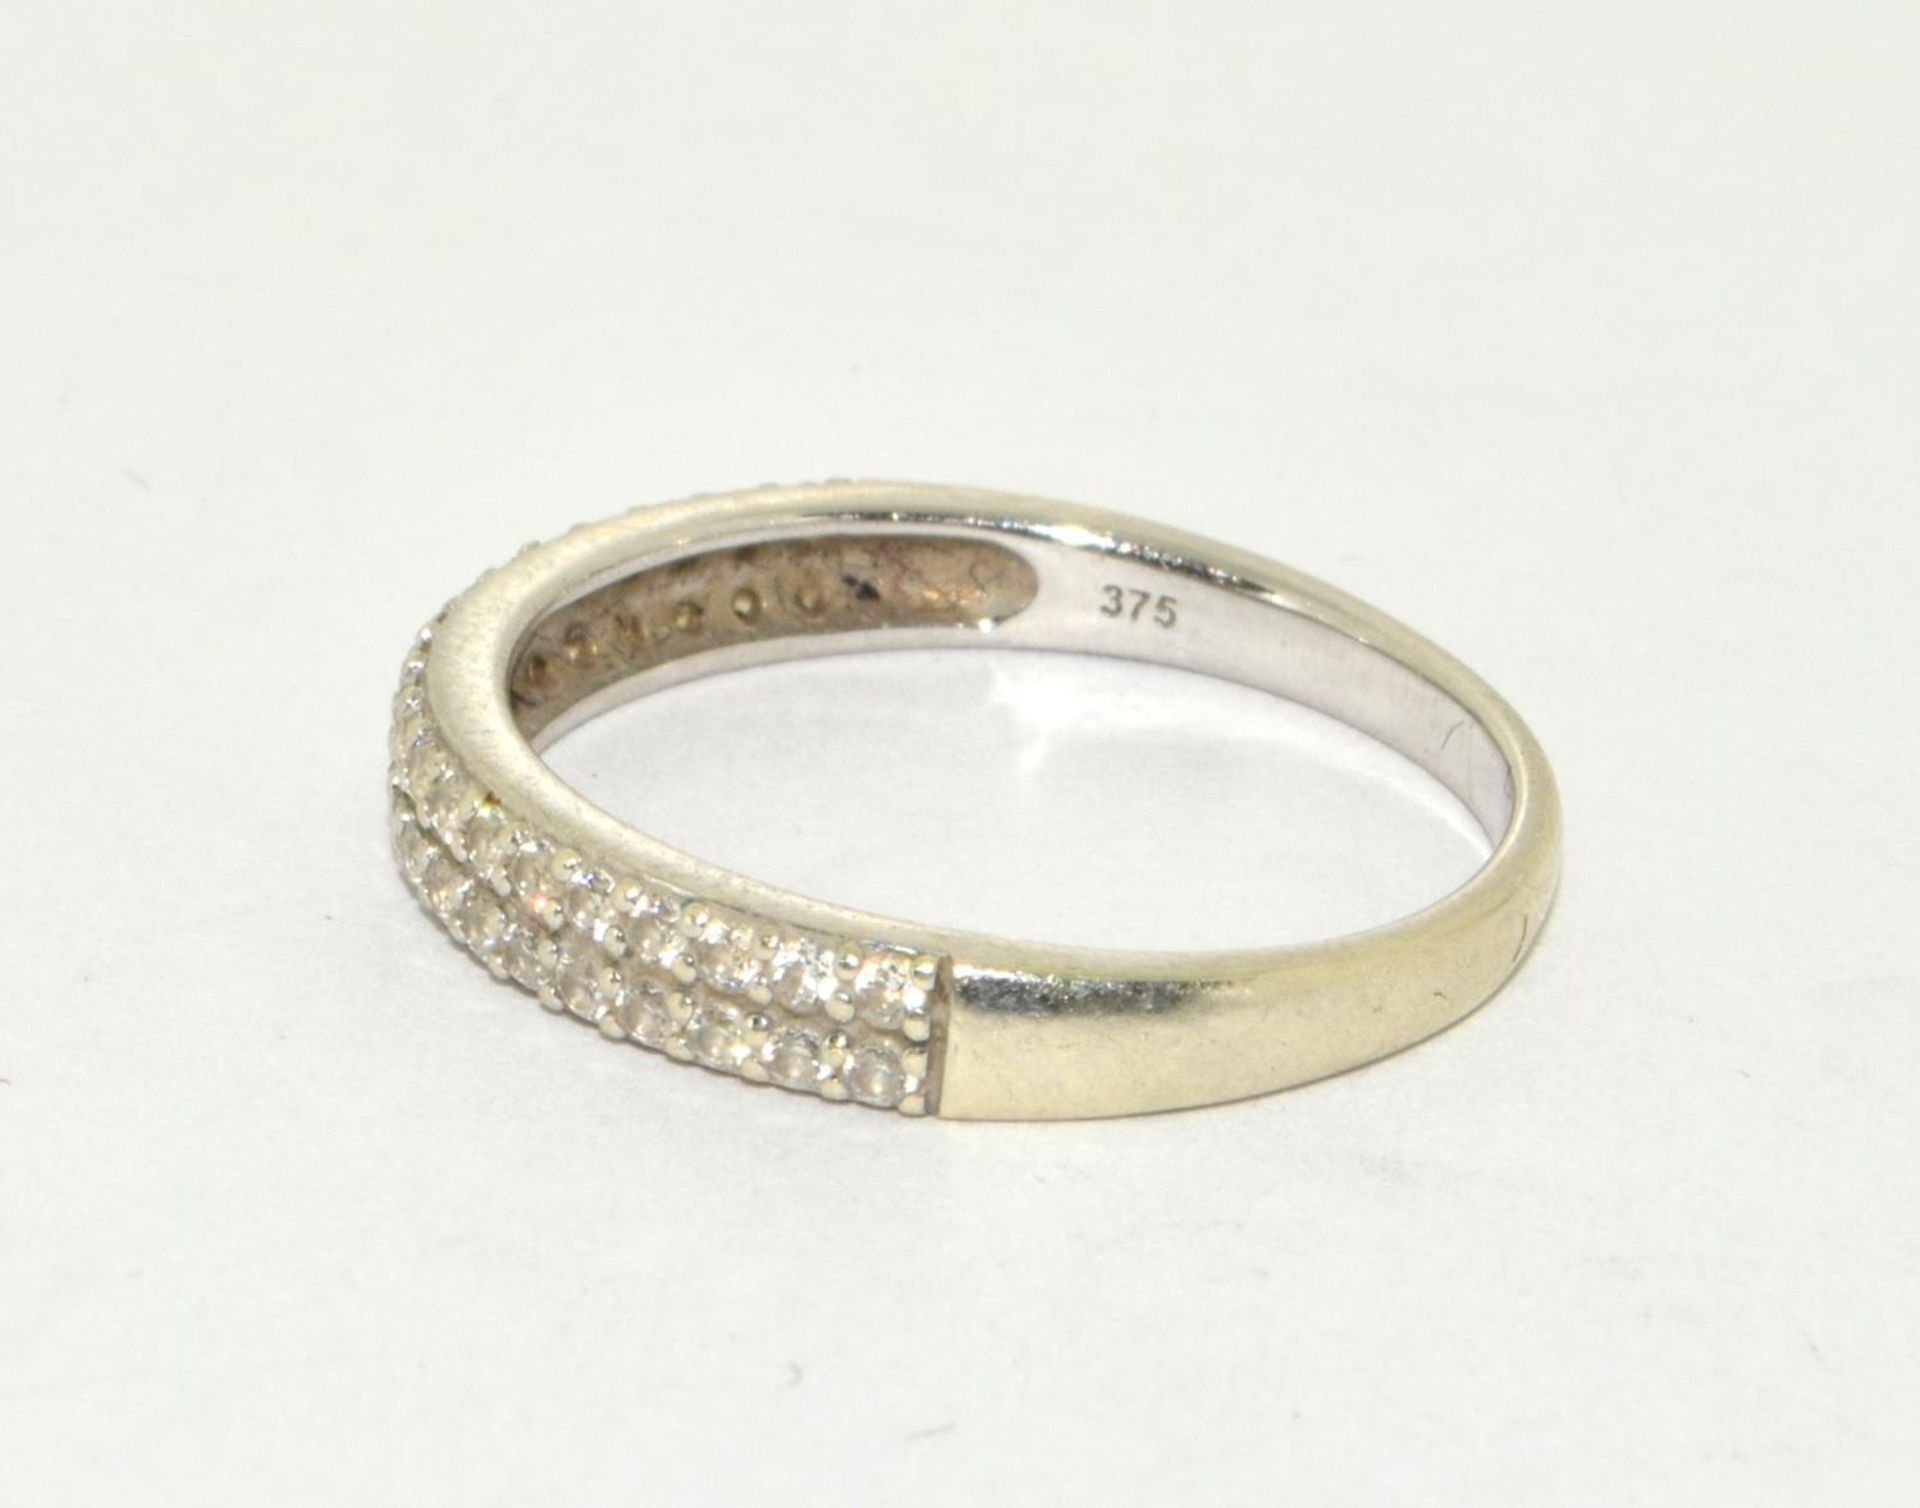 9ct white gold twin band 1/2 eternity ring size P - Image 2 of 5